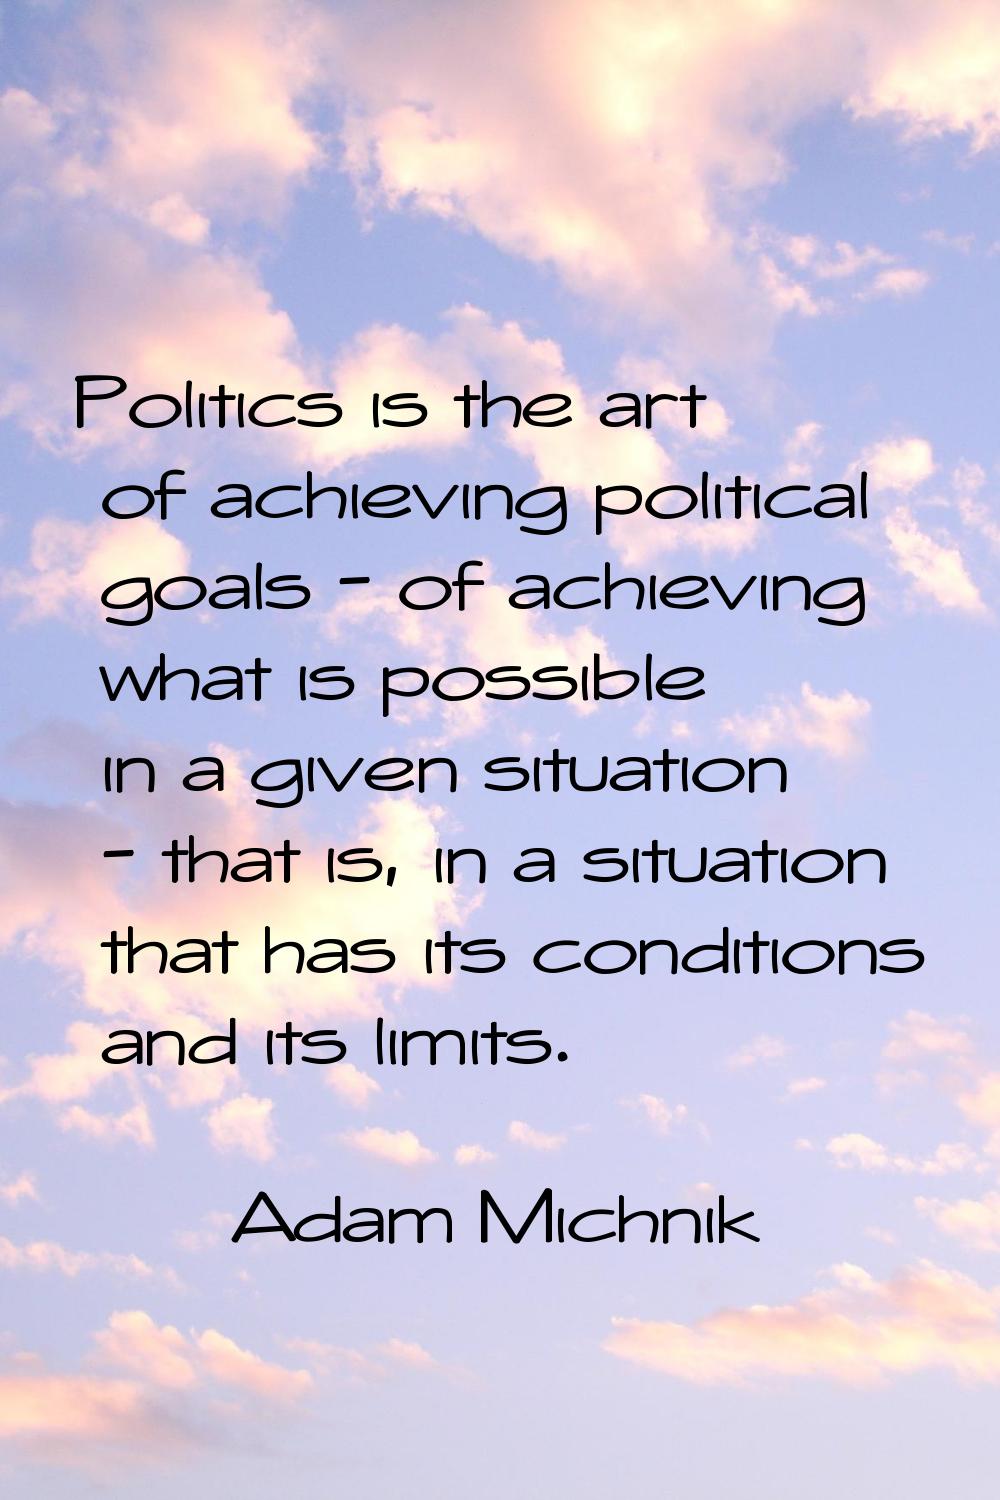 Politics is the art of achieving political goals - of achieving what is possible in a given situati